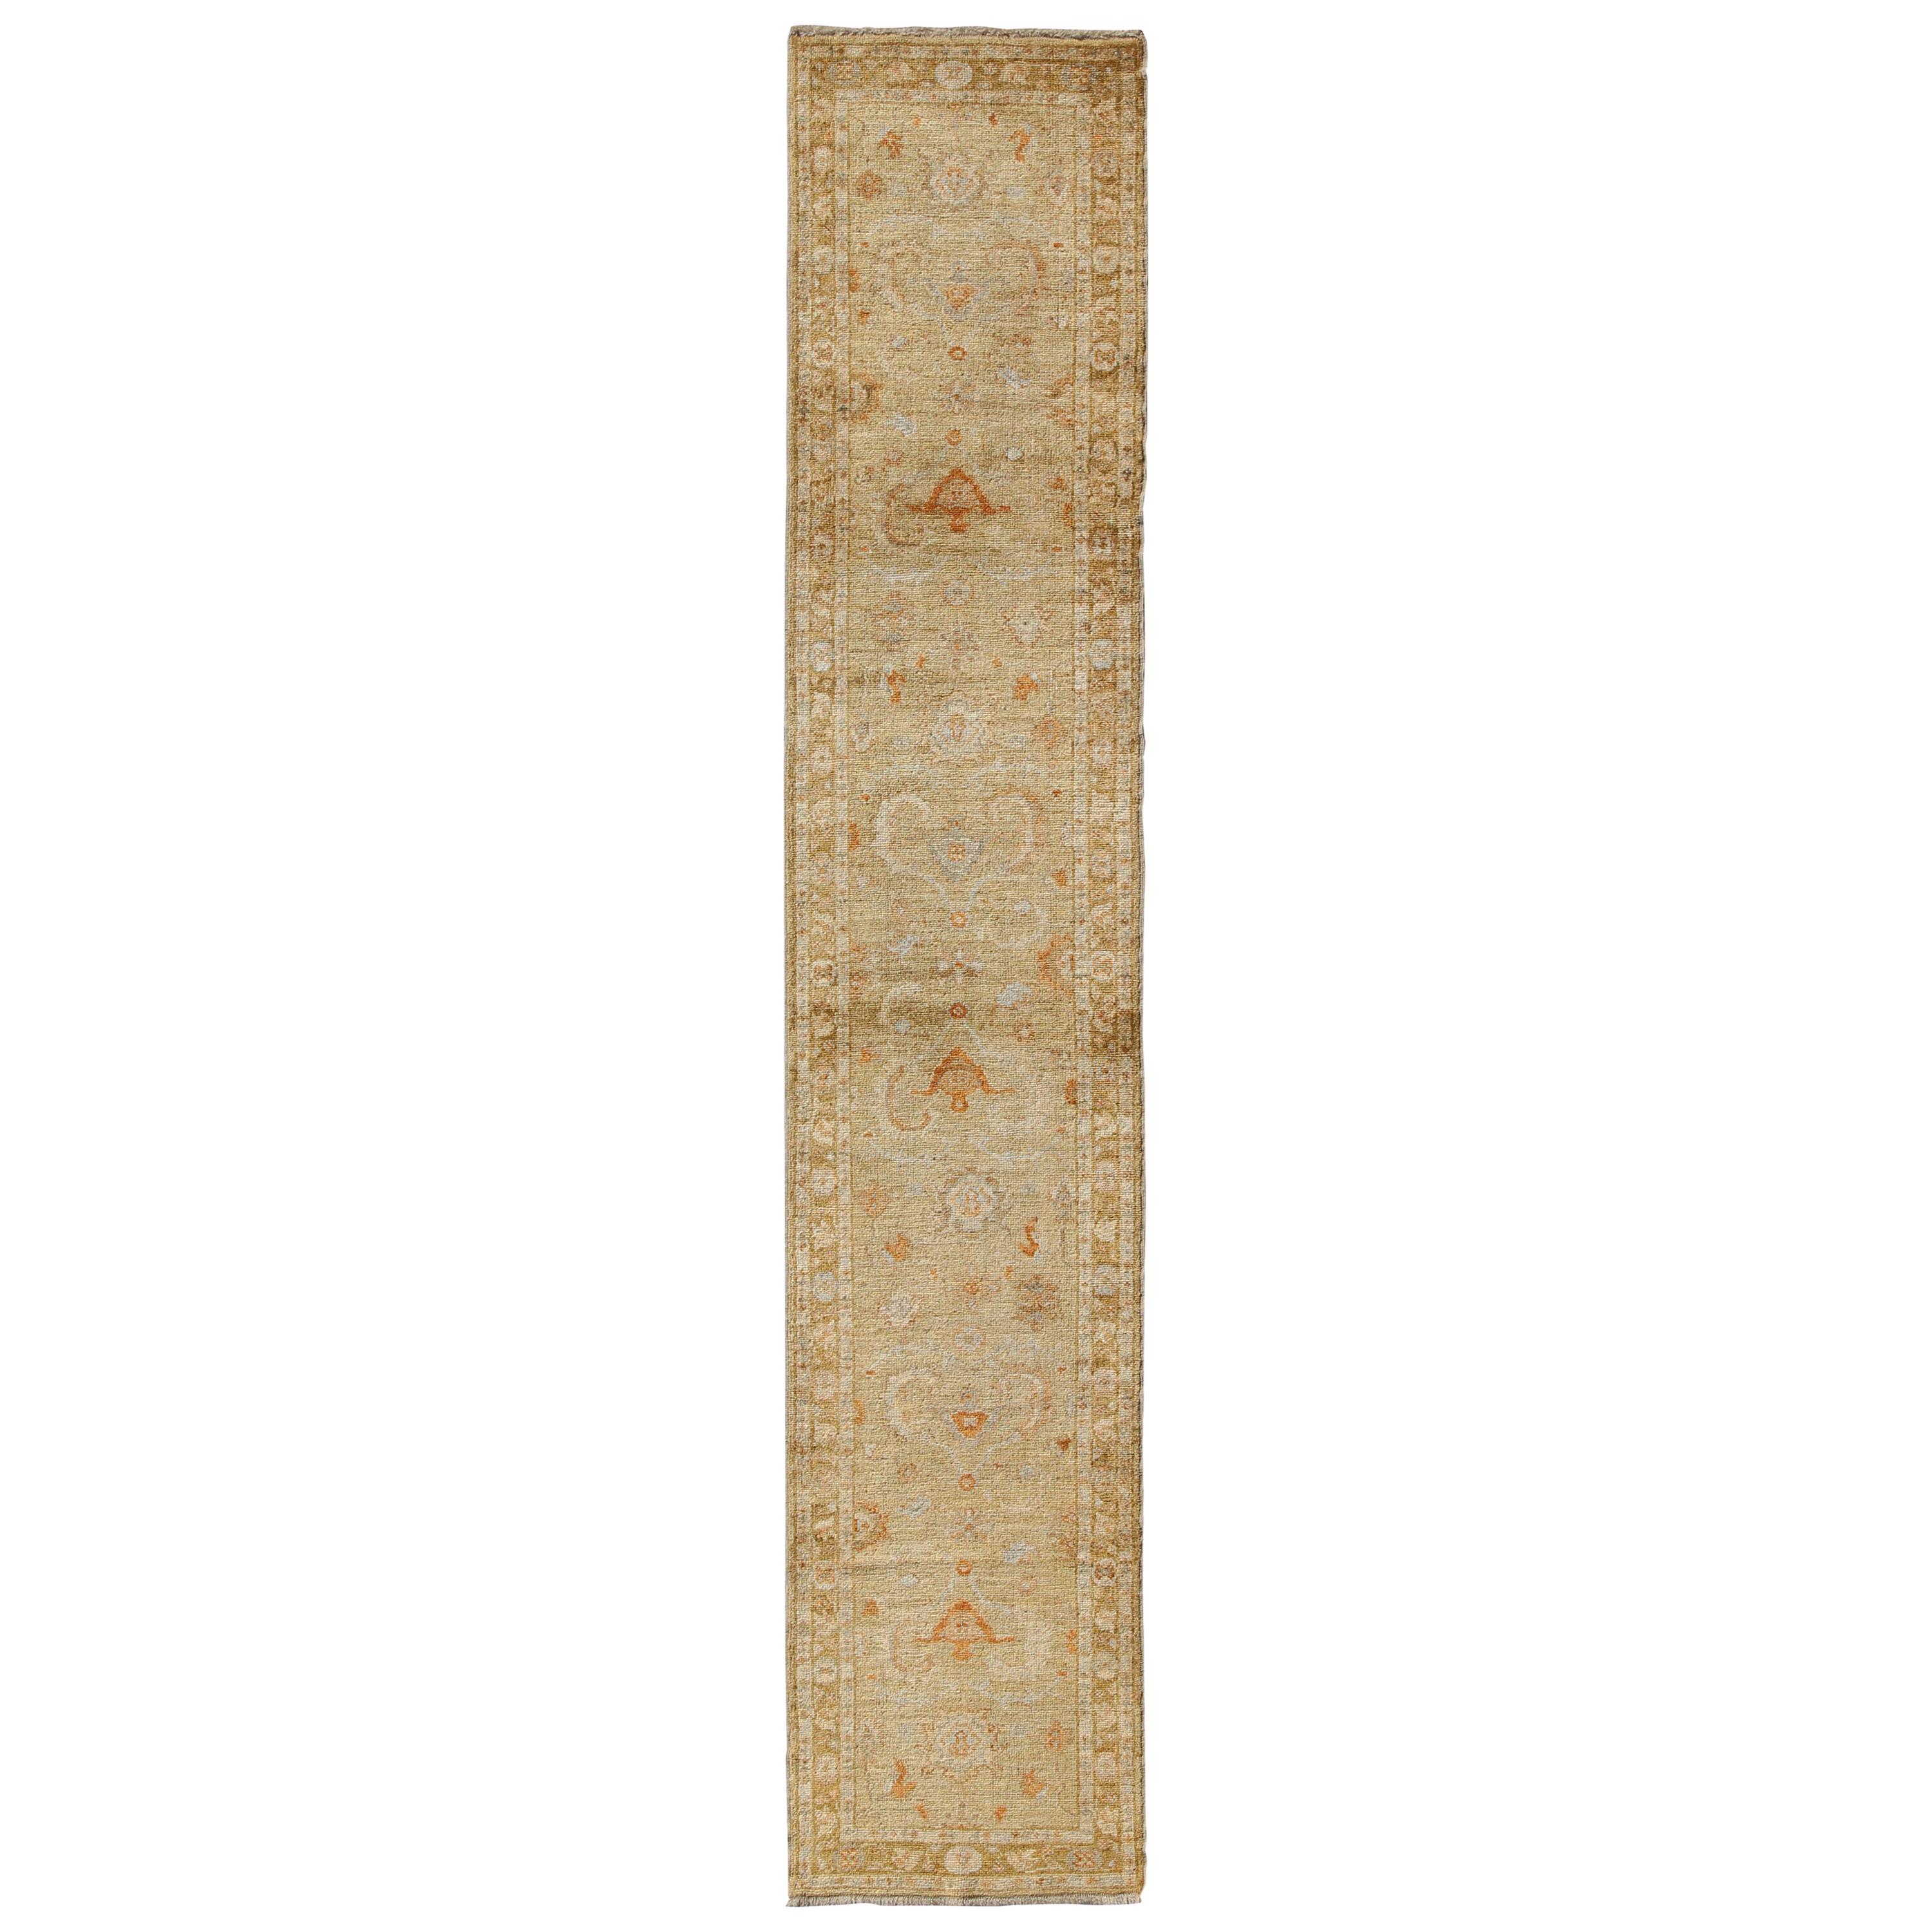 Angora Oushak Turkish Runner with Classic Design in Gold Background